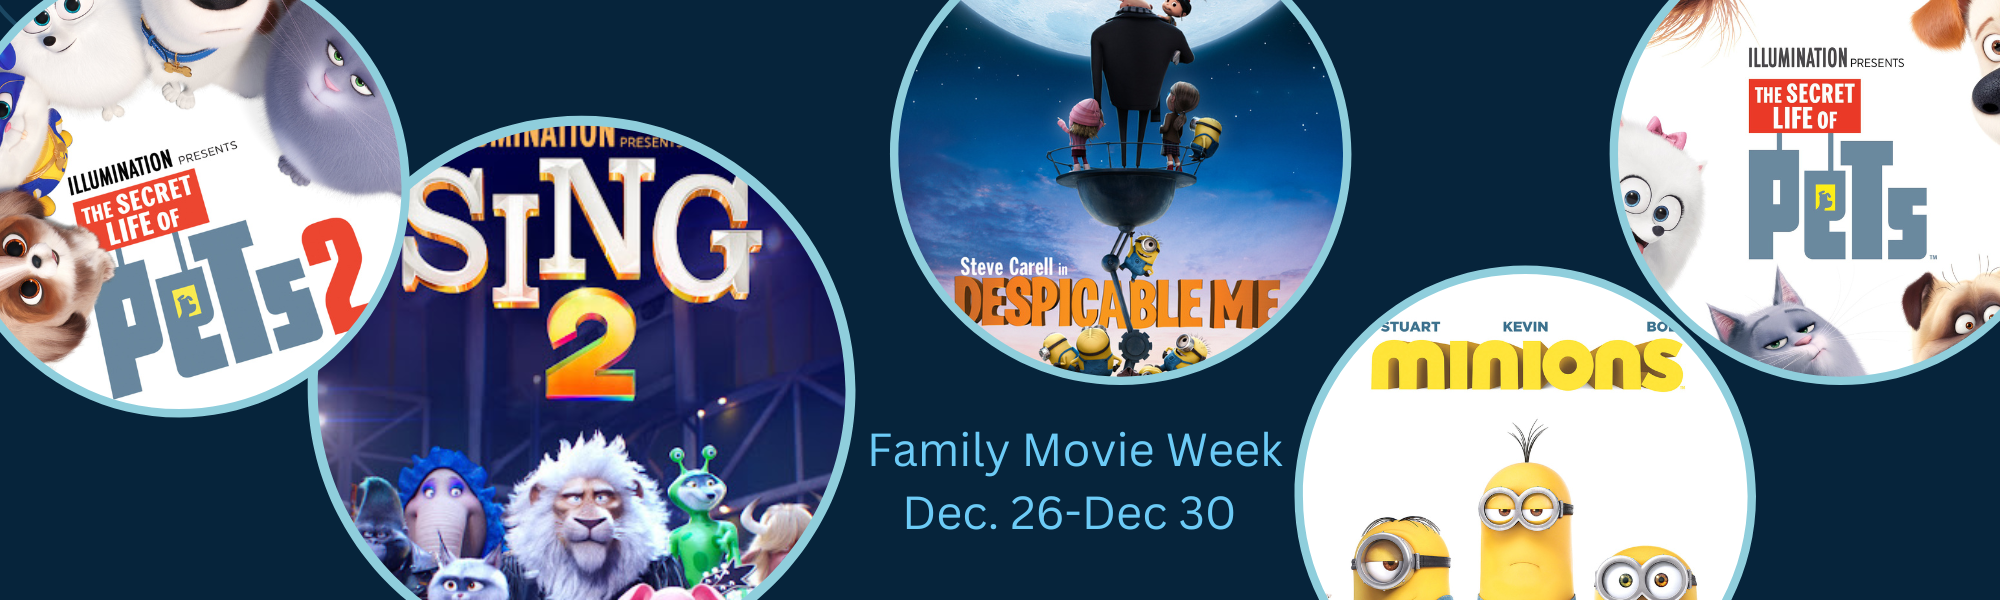 Family Movie Week-all tickets $5